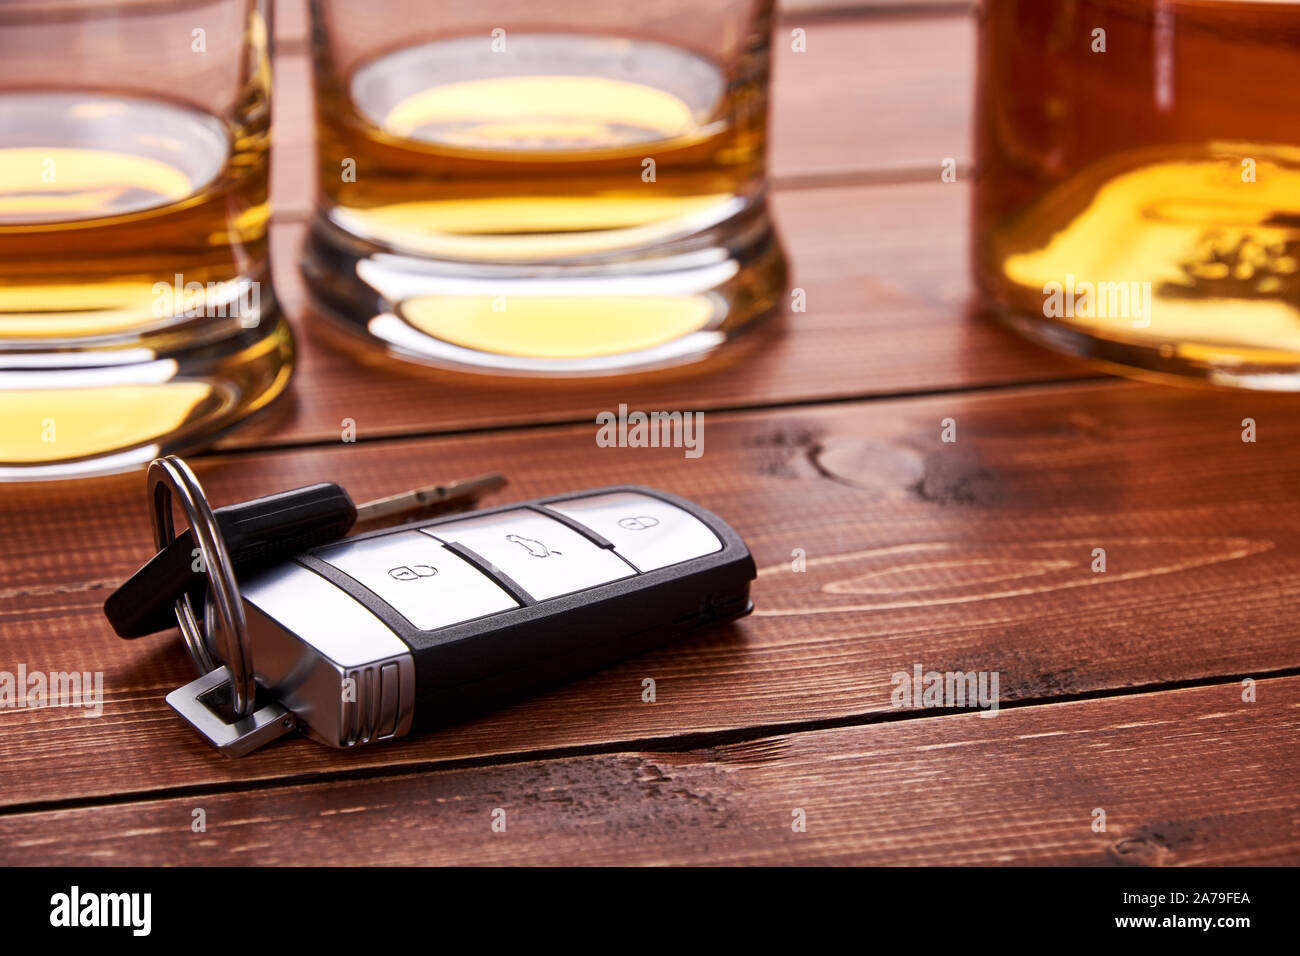 Still life on old wooden table top. Car keys, several glasses and a bottle of whiskey or alcohol. Suitable for drunk driving. Stock Photo